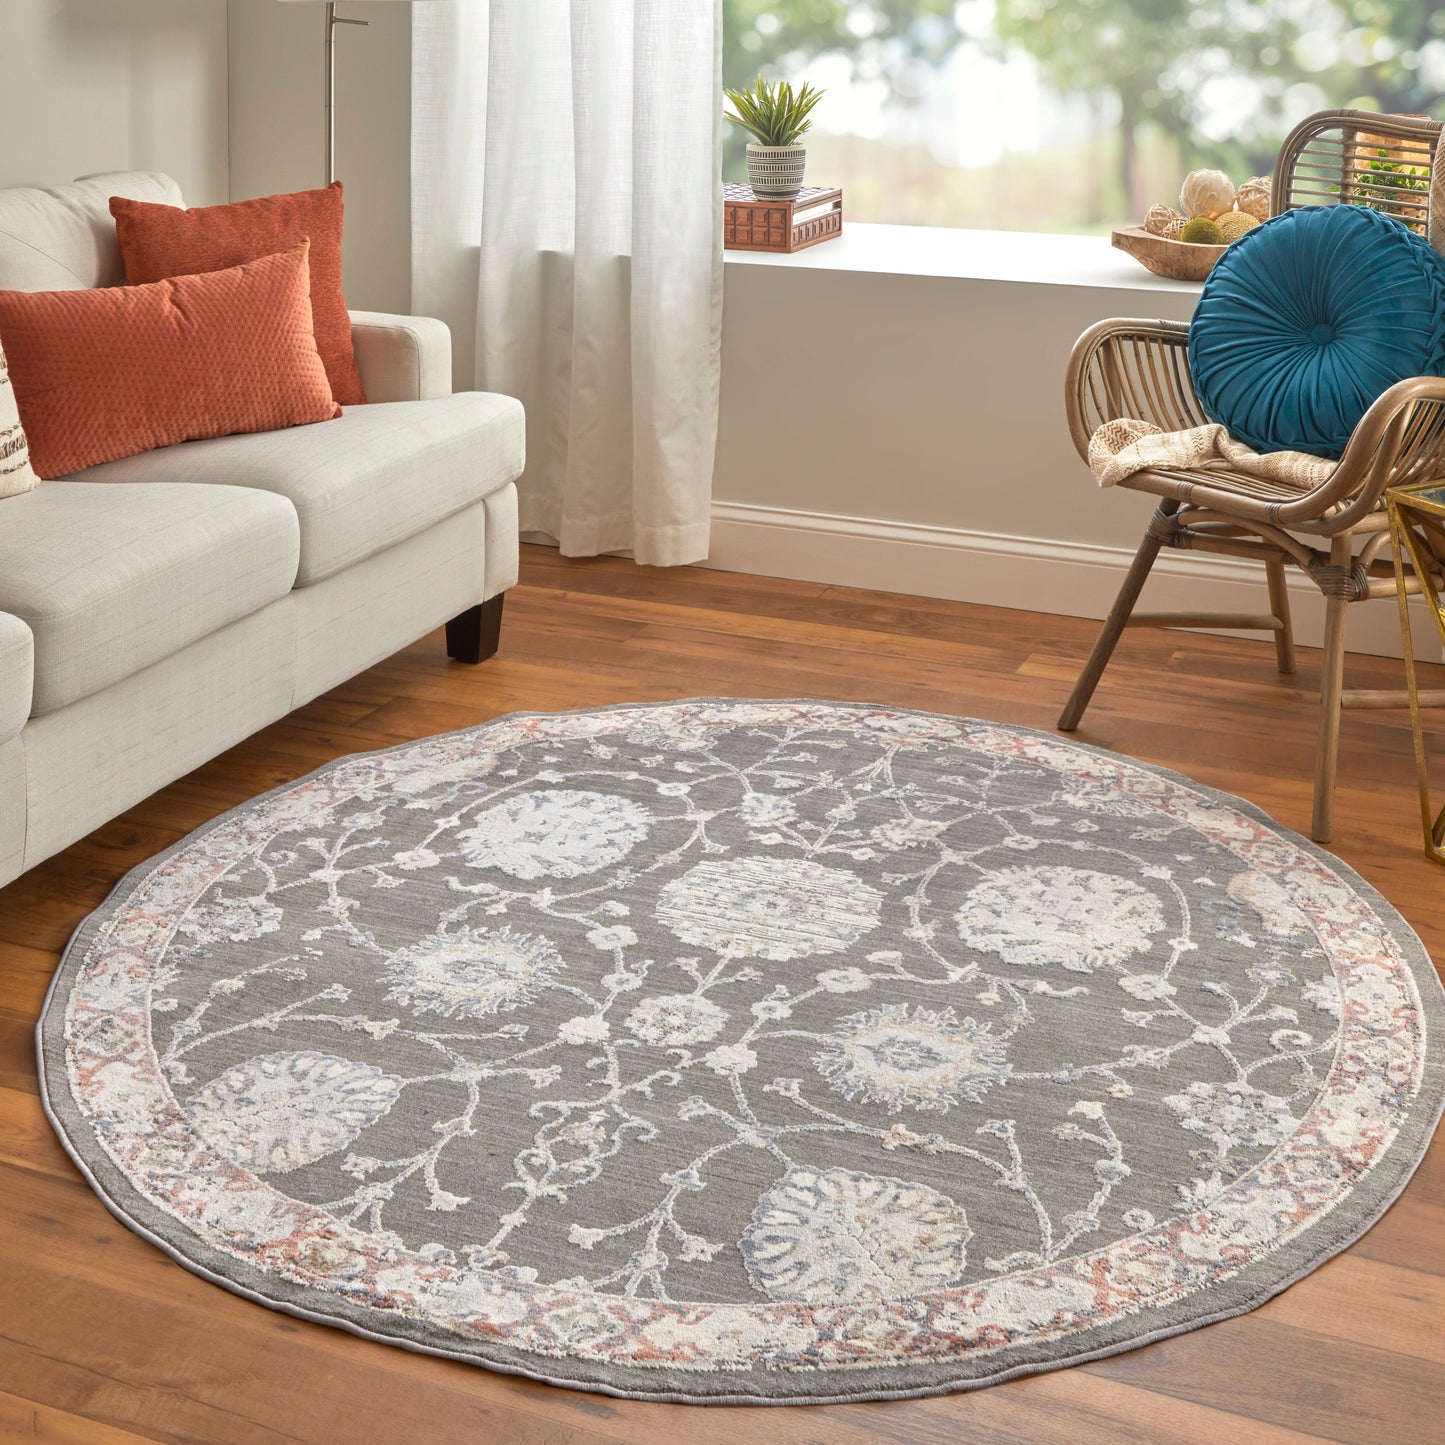 Thackery 39CXF Power Loomed Synthetic Blend Indoor Area Rug by Feizy Rugs